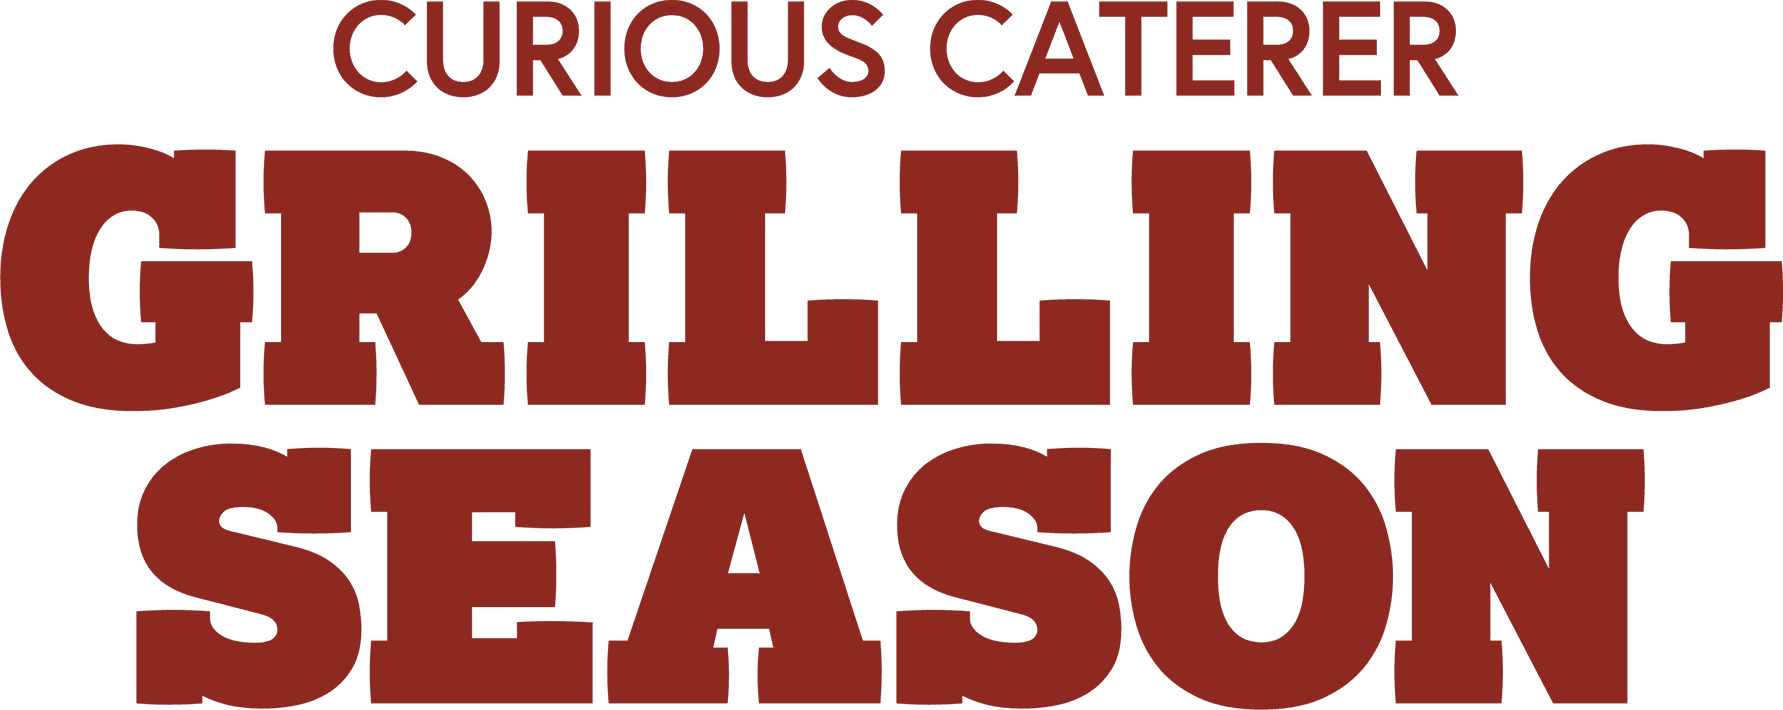 Curious Caterer: Grilling Season logo